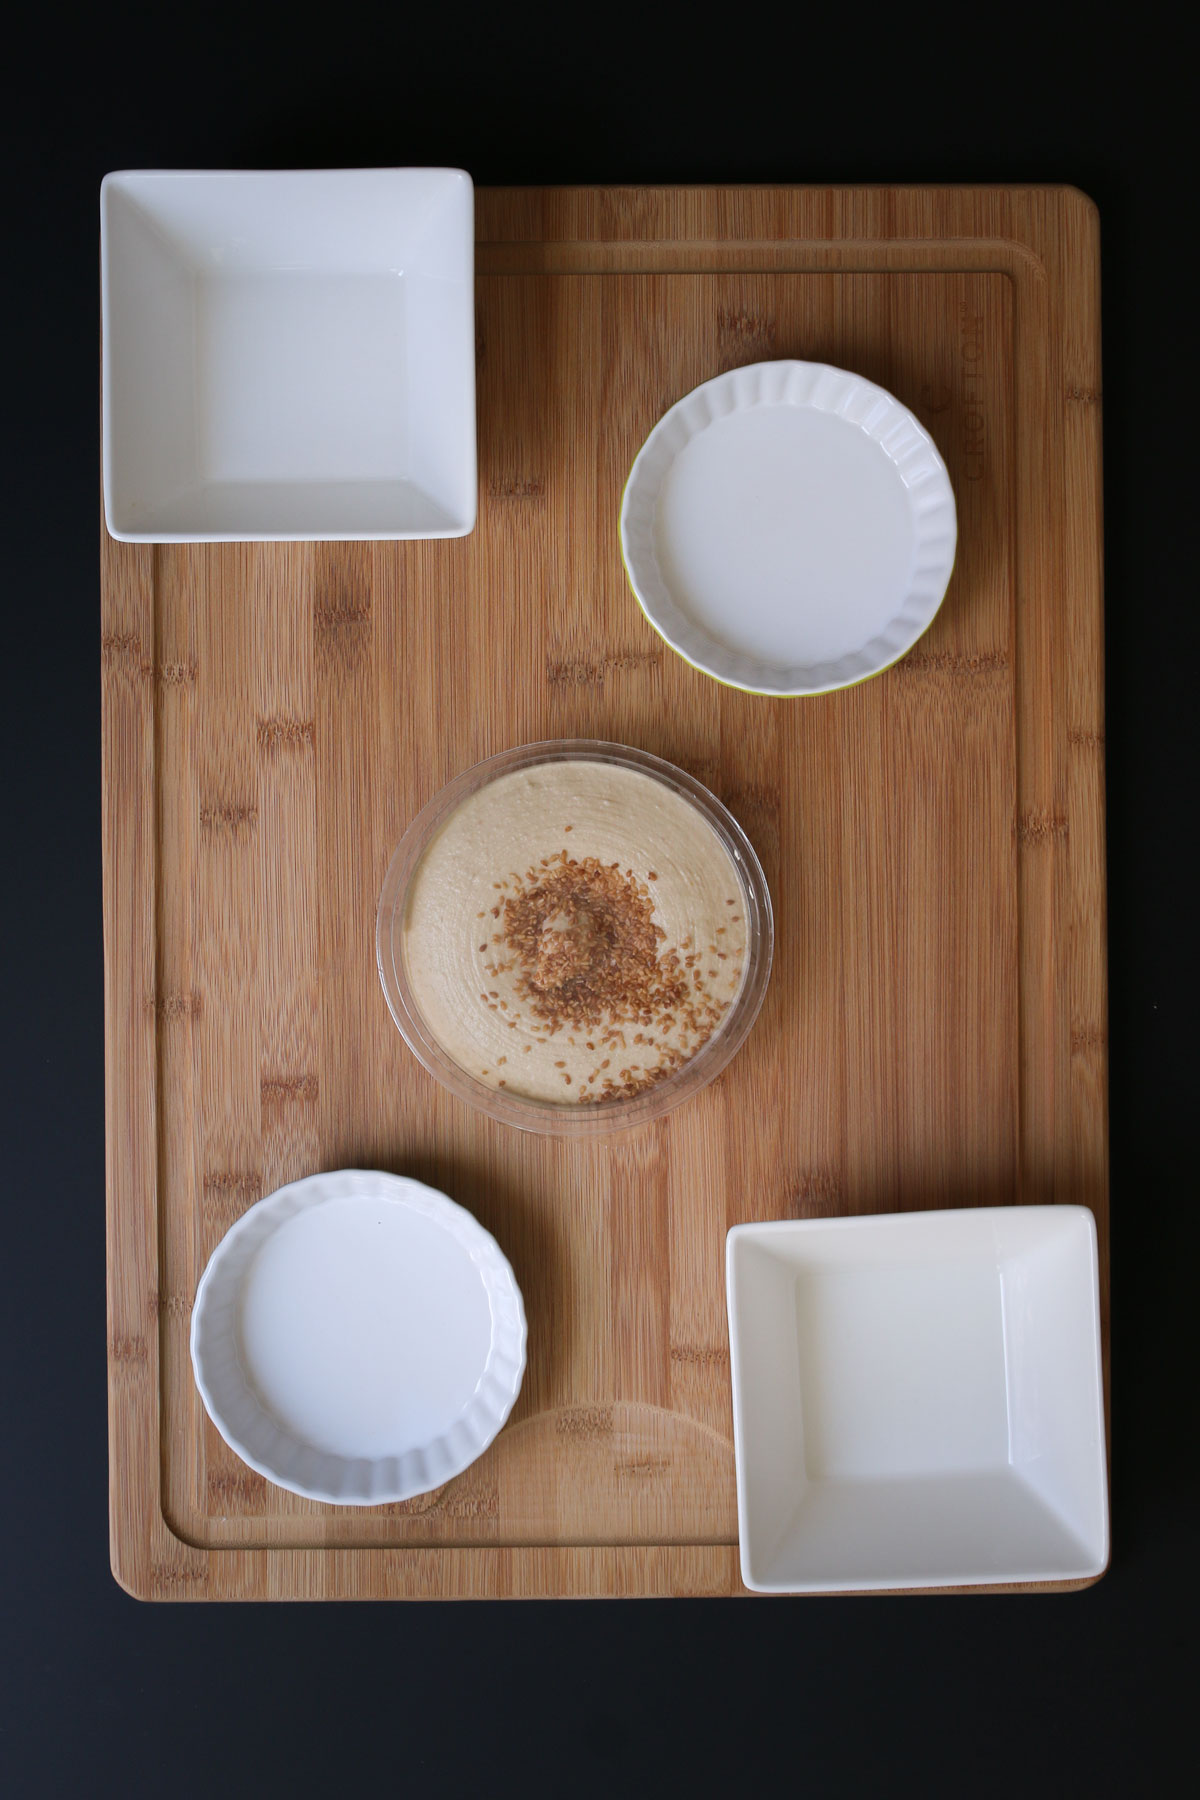 large wooden board with four white ceramic dishes spread out and a tub of hummus in the center.